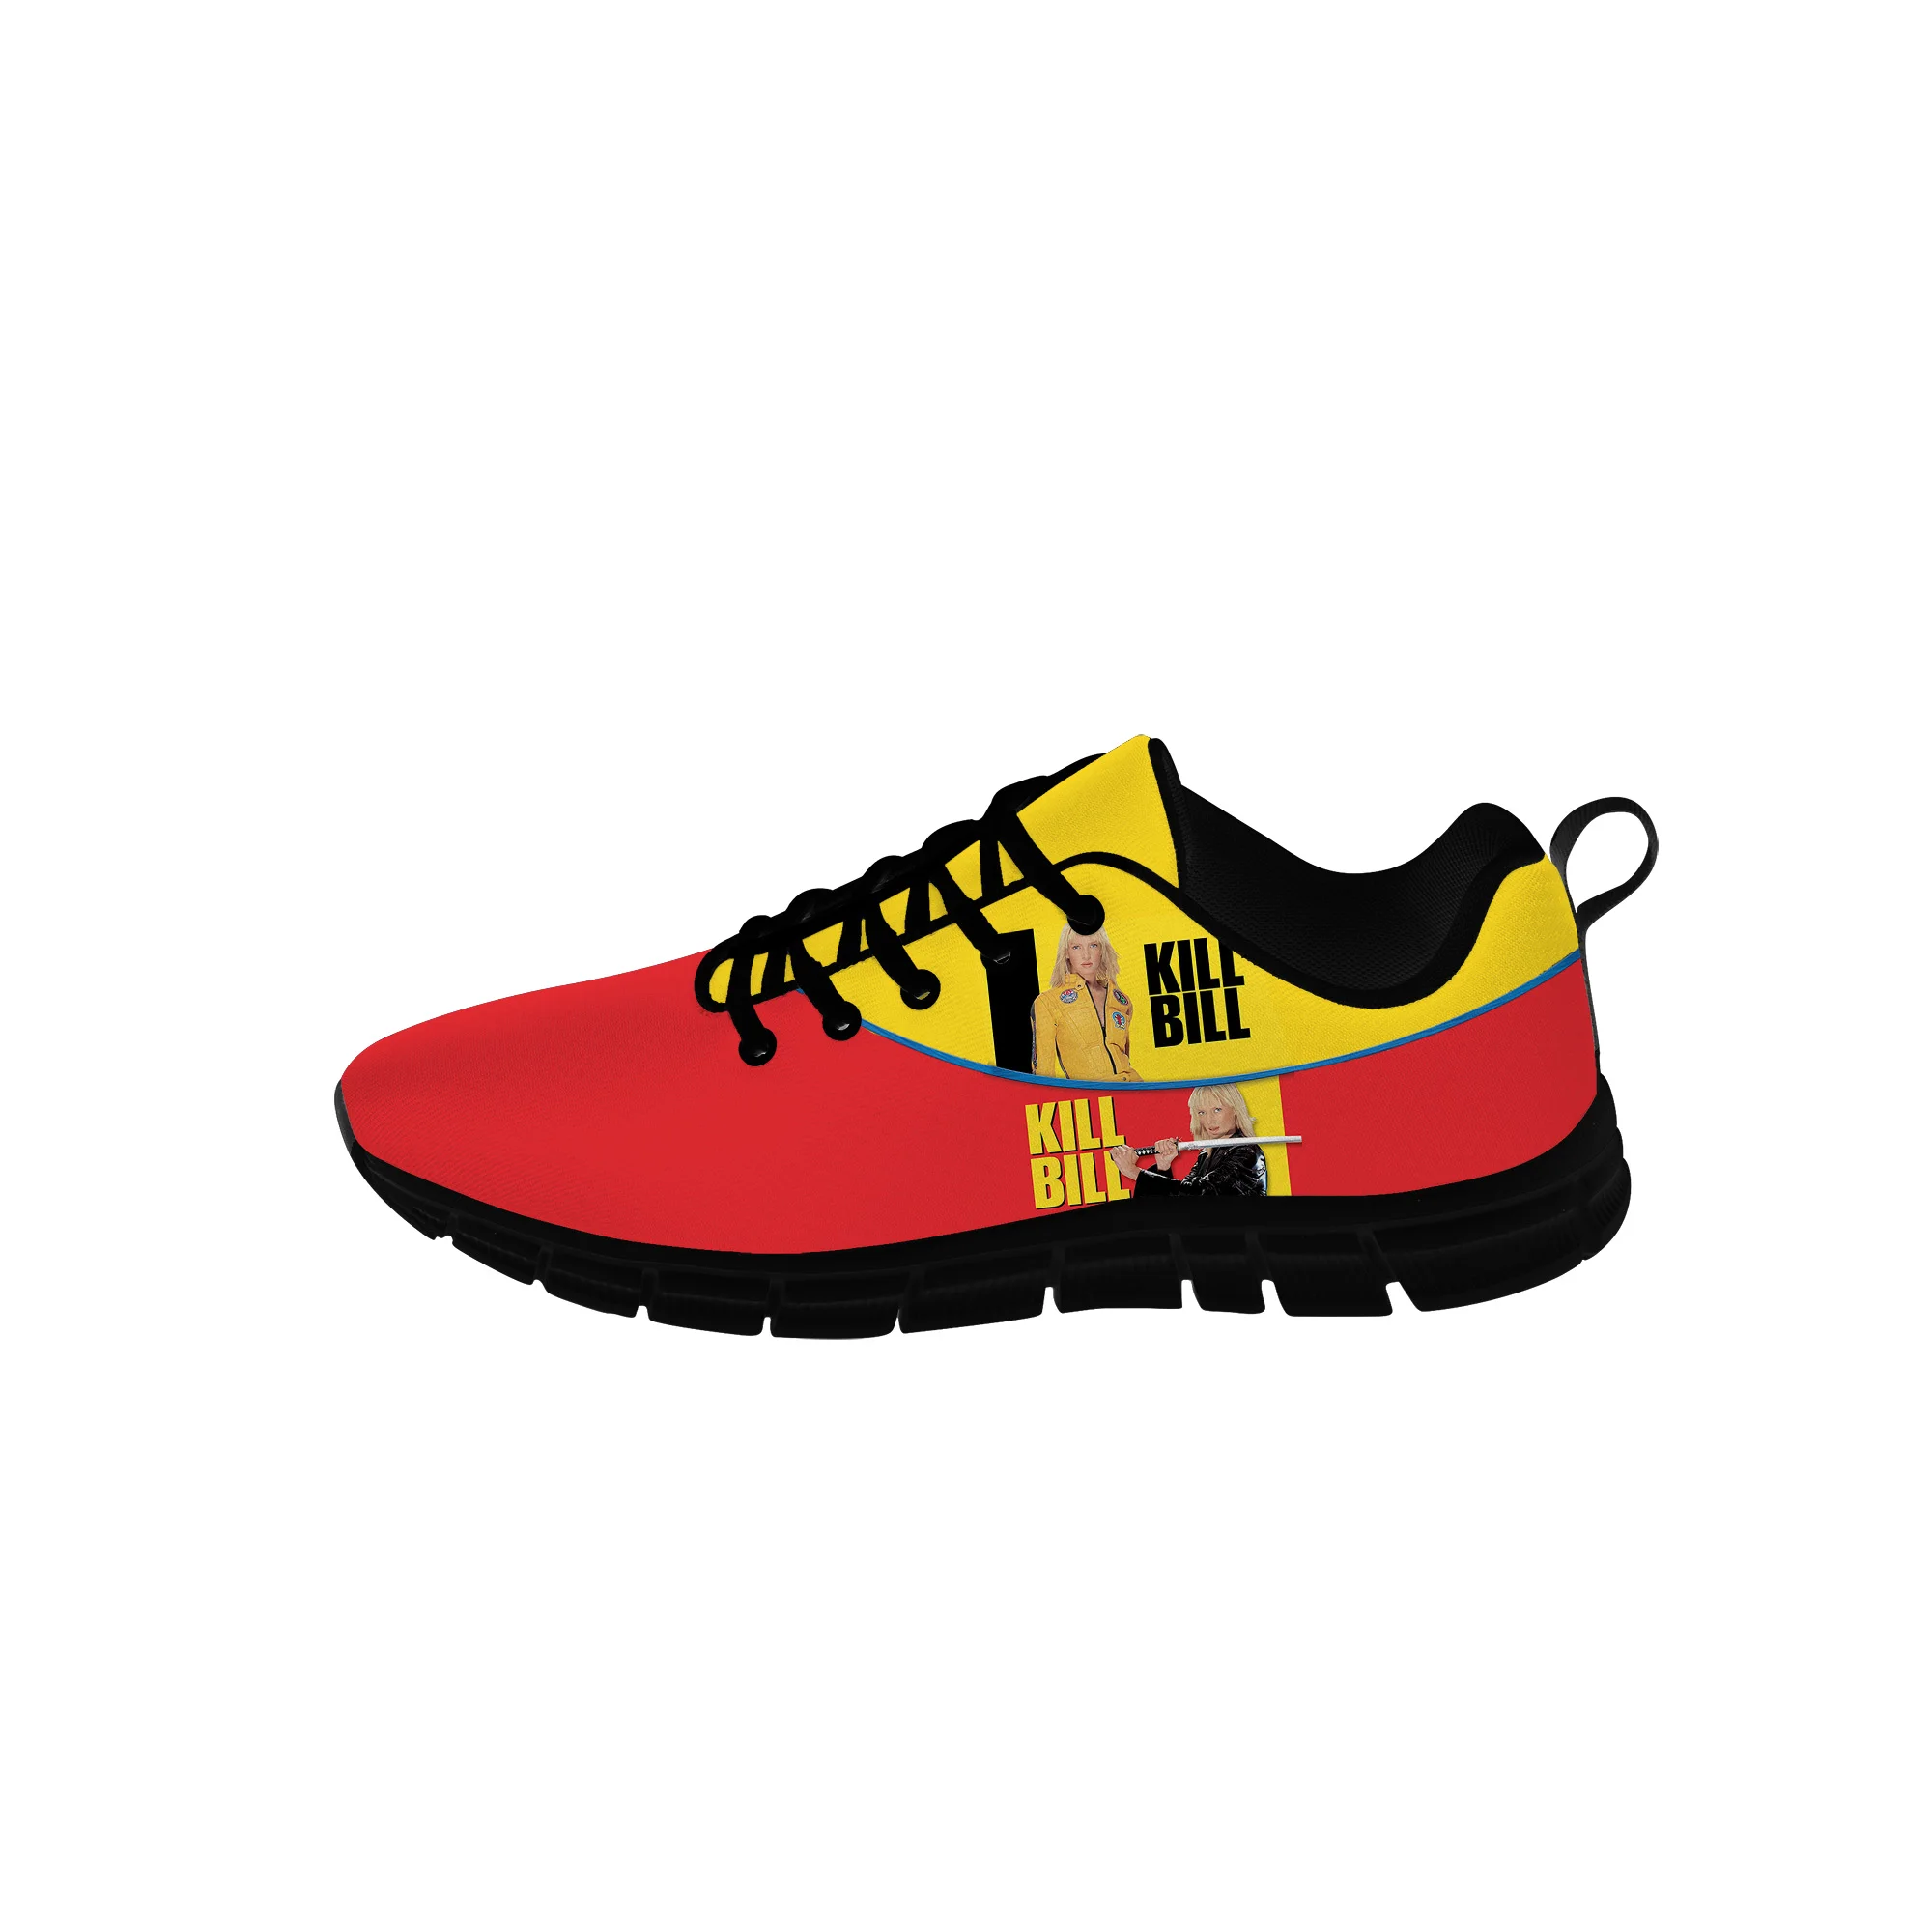 Movie Kill Bill Low Top Sneakers Mens Womens Teenager Casual Shoes Canvas Running Shoes 3D Printed Breathable Lightweight Shoe